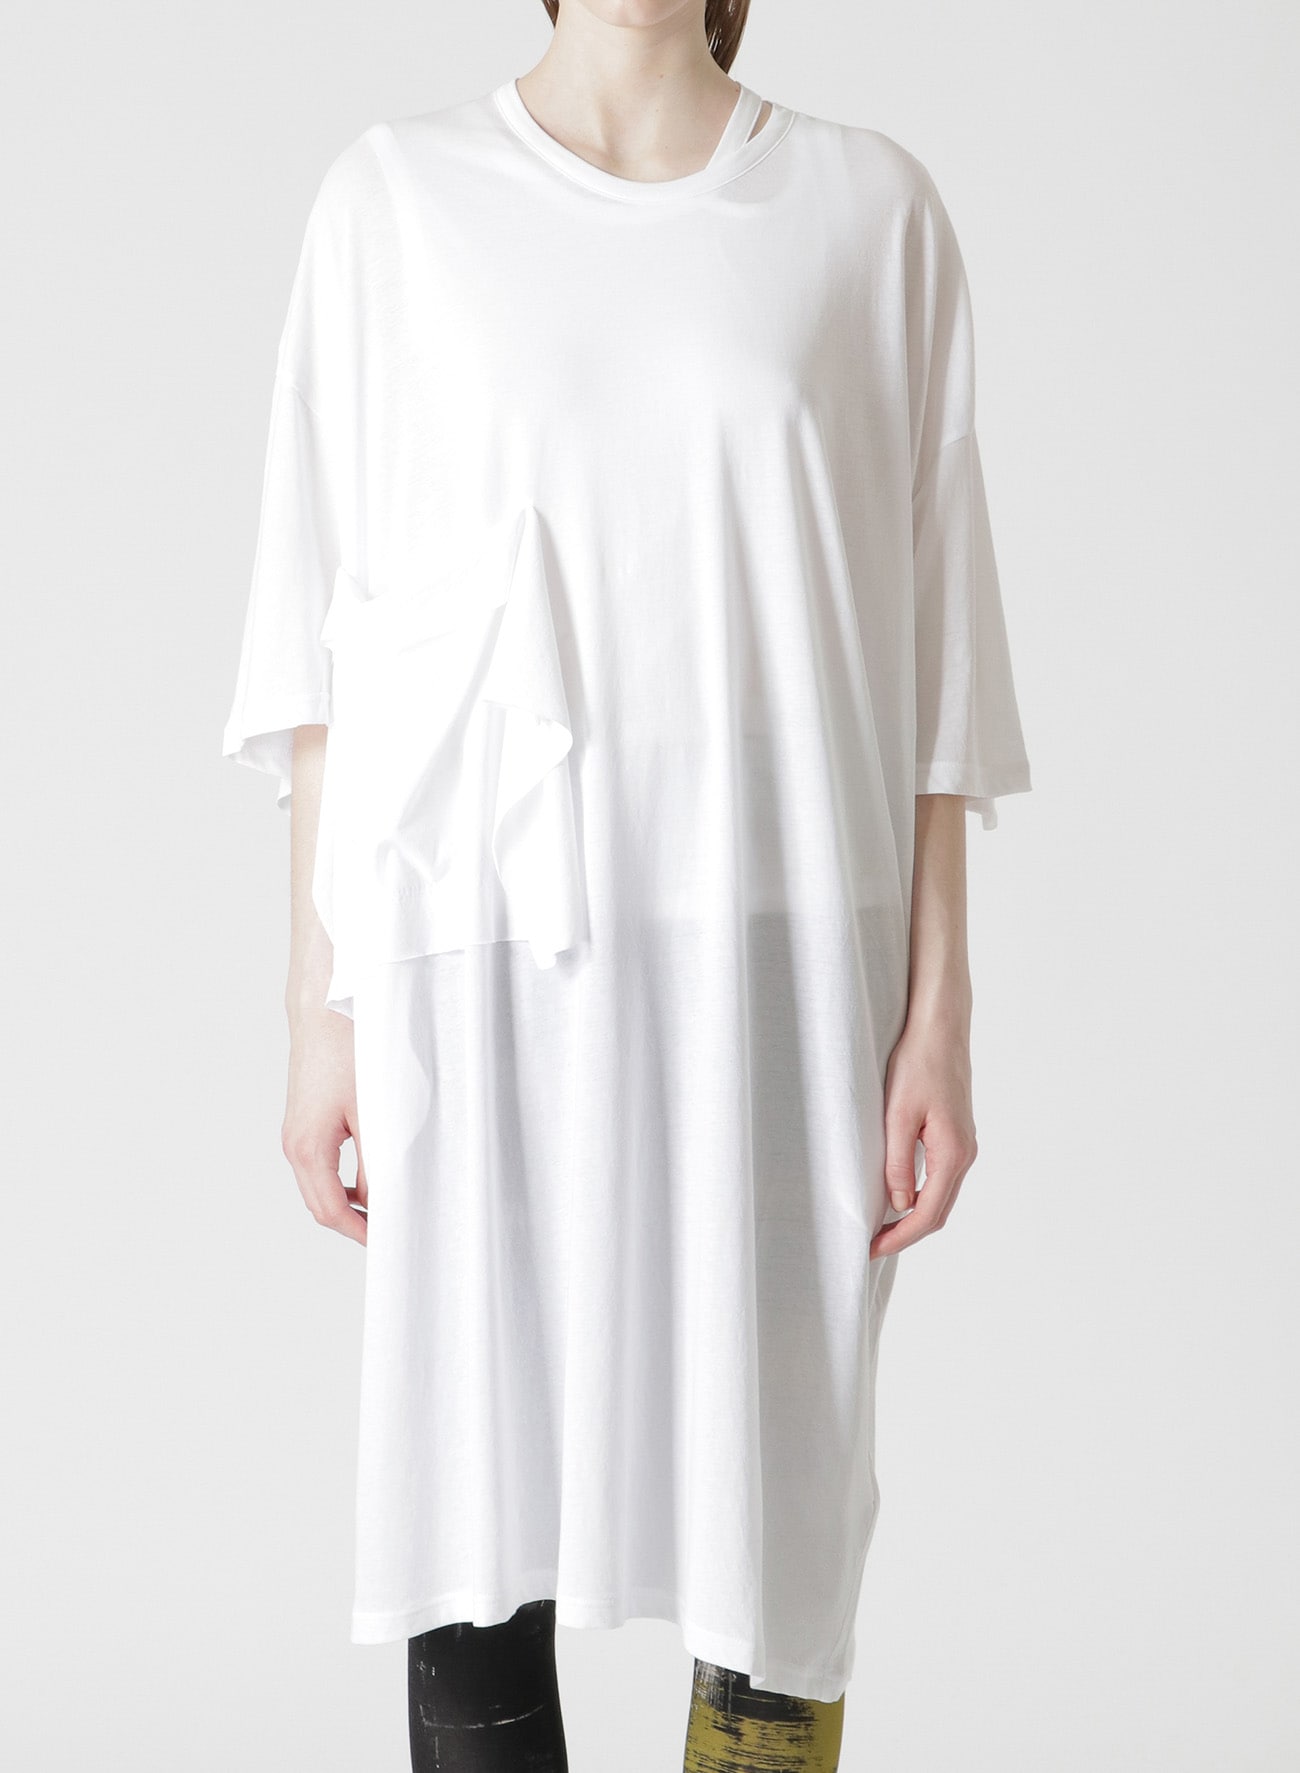 T-SHIRT DRESS WITH CHEST POCKET (S Off White): Vintage 1.1｜THE 